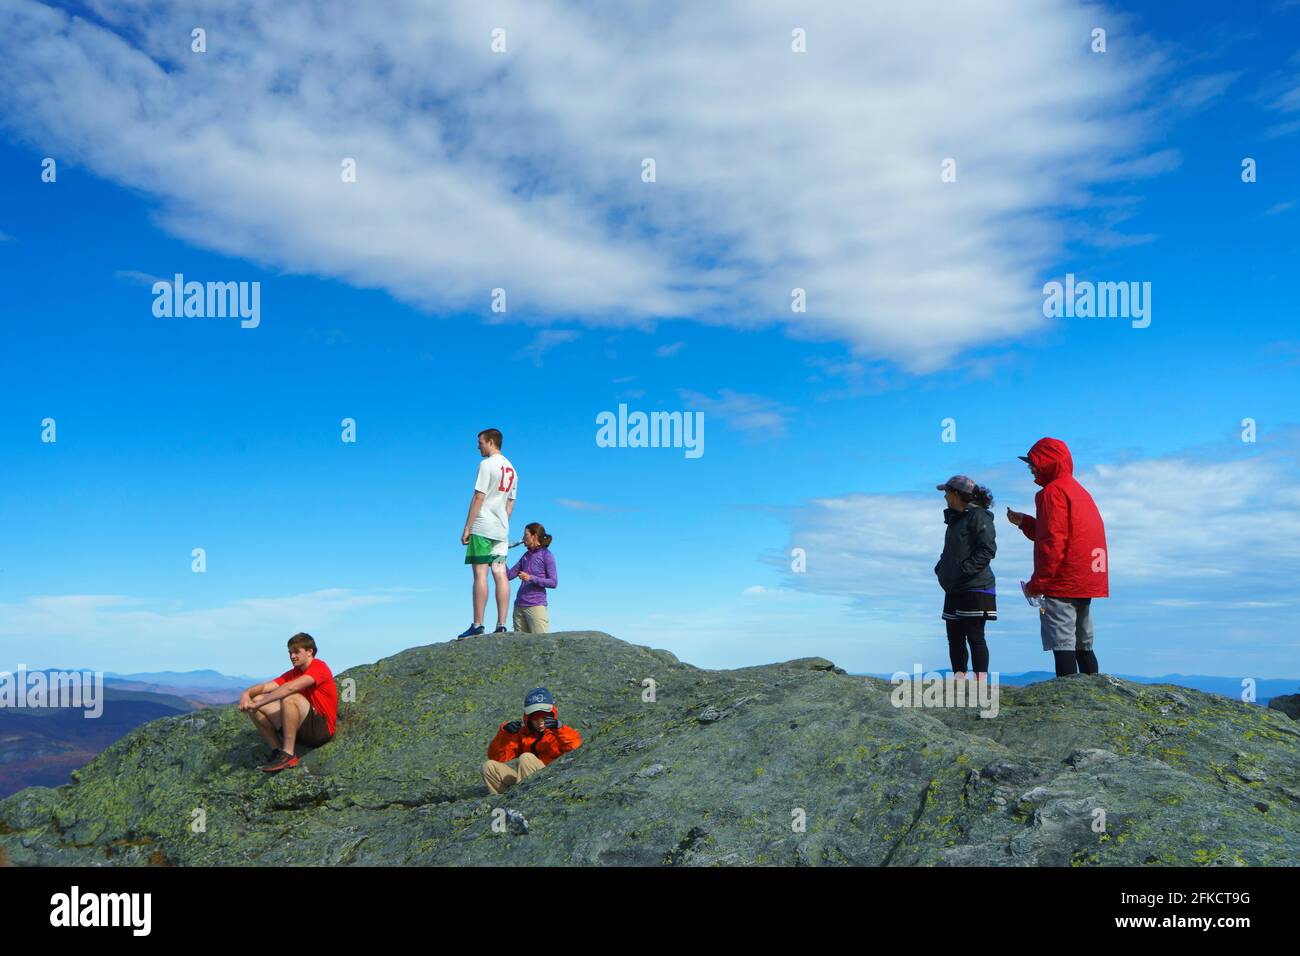 Hikers on the rocky summit of Camel's Hump, Vermont, USA. Stock Photo